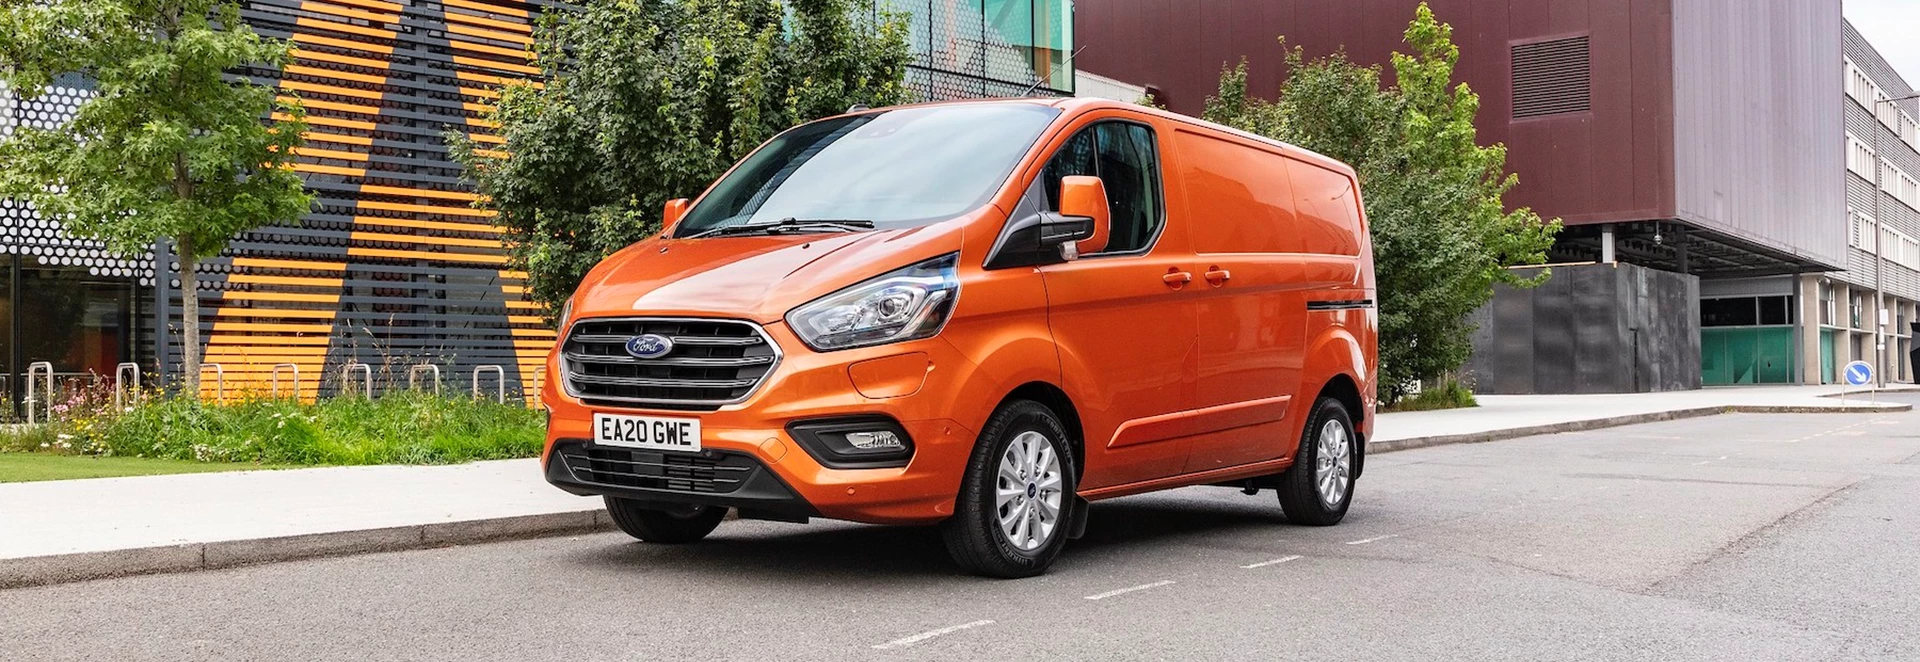 Ford announces new payment options for commercial vehicle customers 